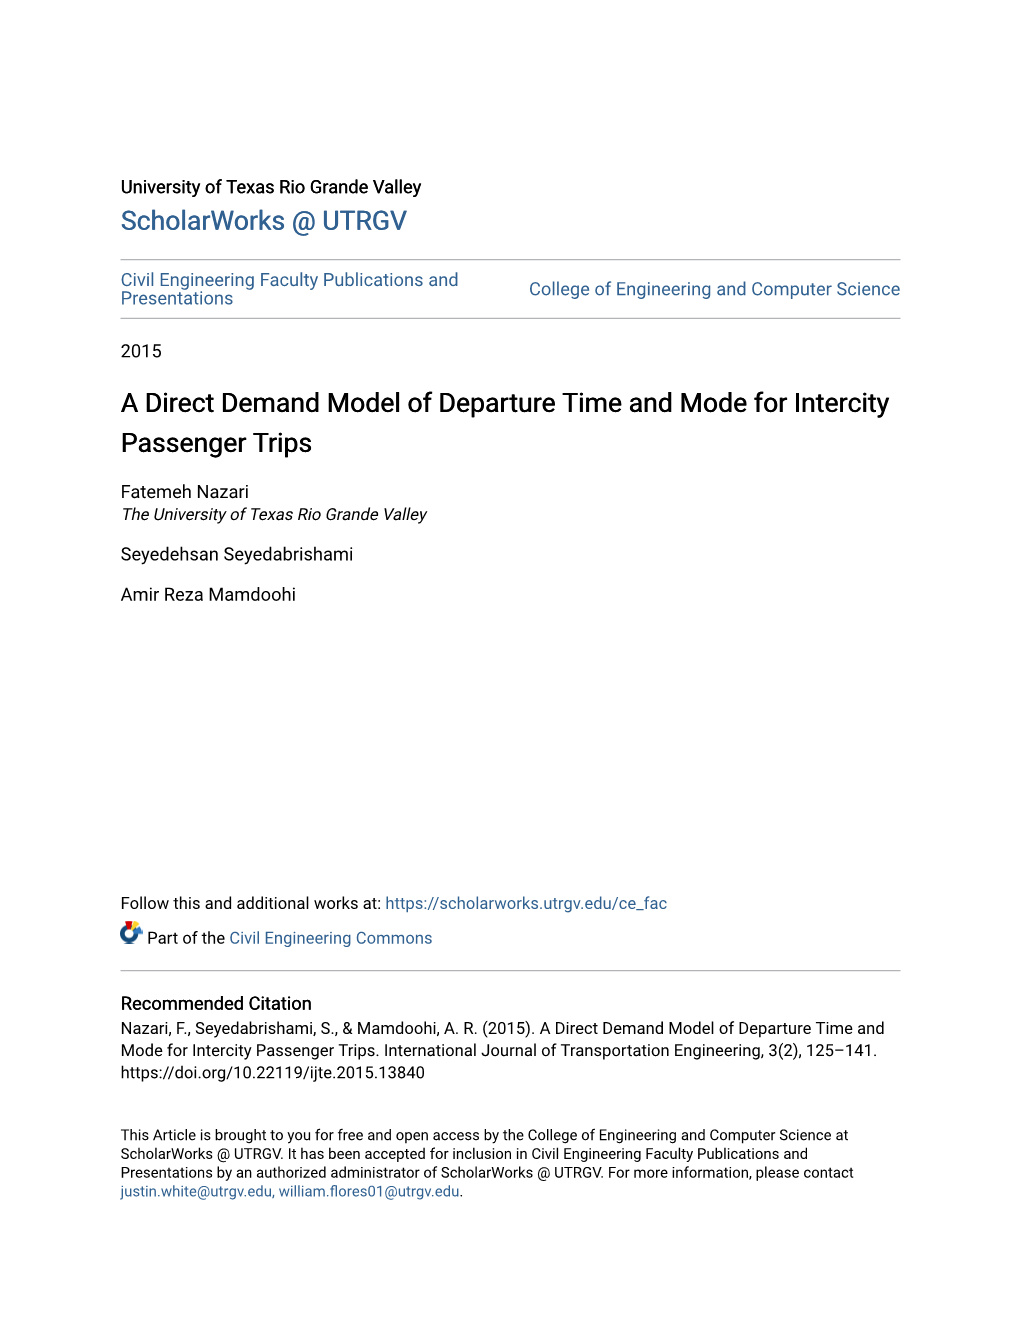 A Direct Demand Model of Departure Time and Mode for Intercity Passenger Trips